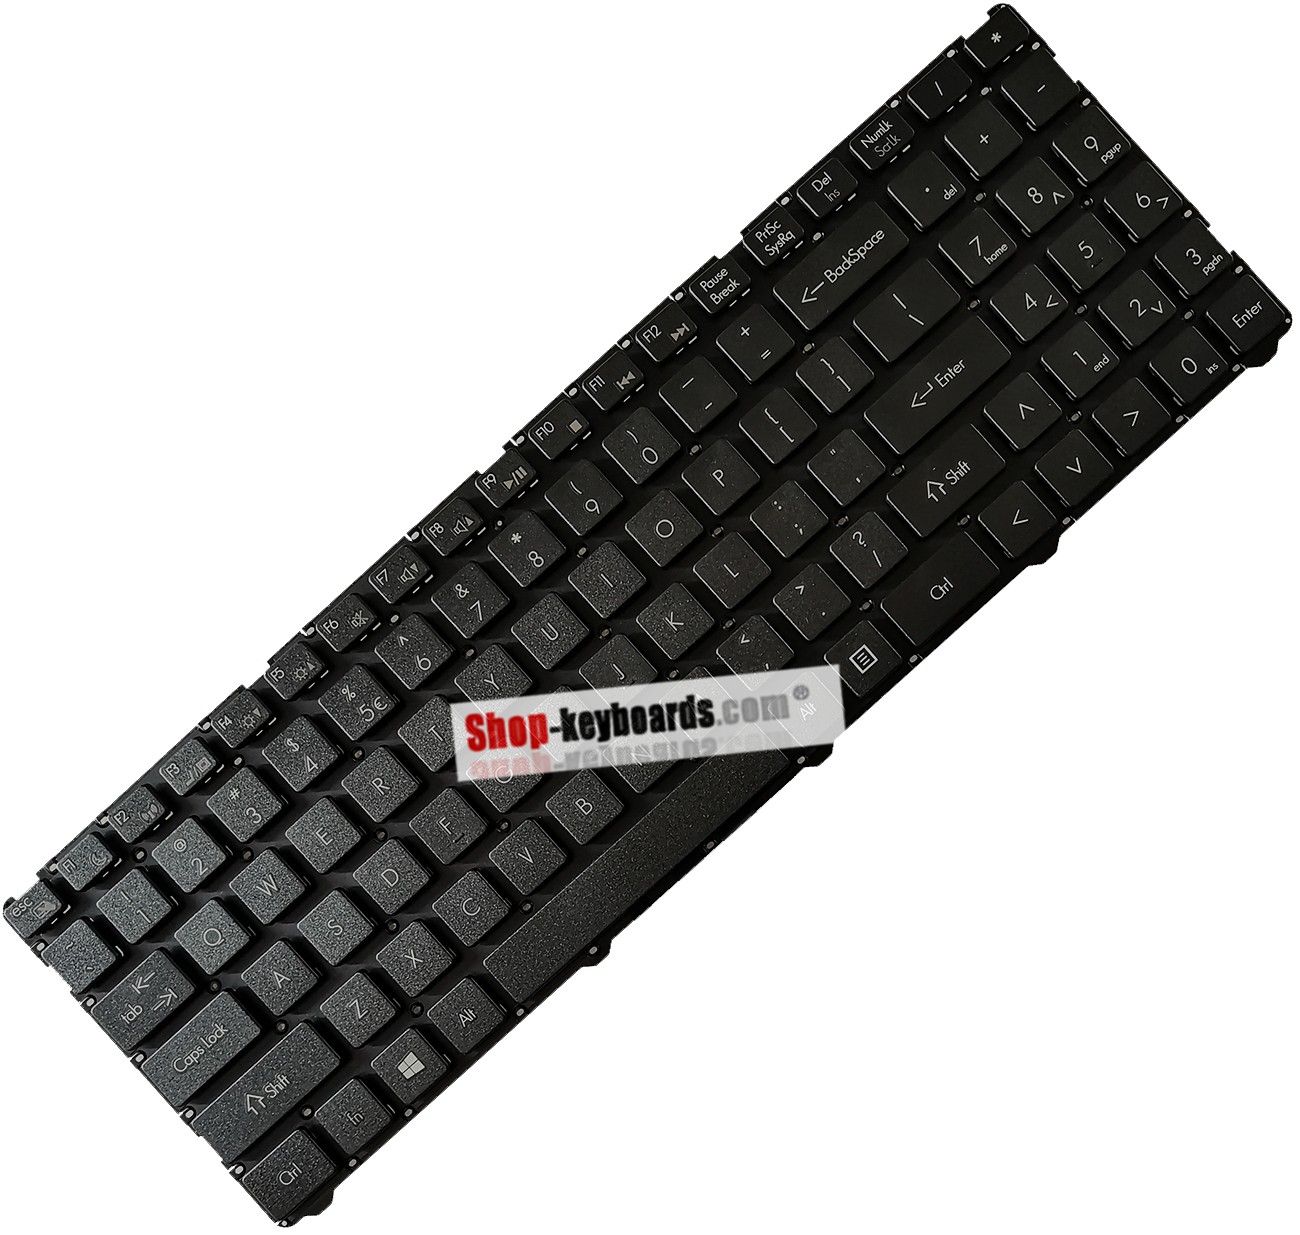 LG MP-12K73EO-9208 Keyboard replacement